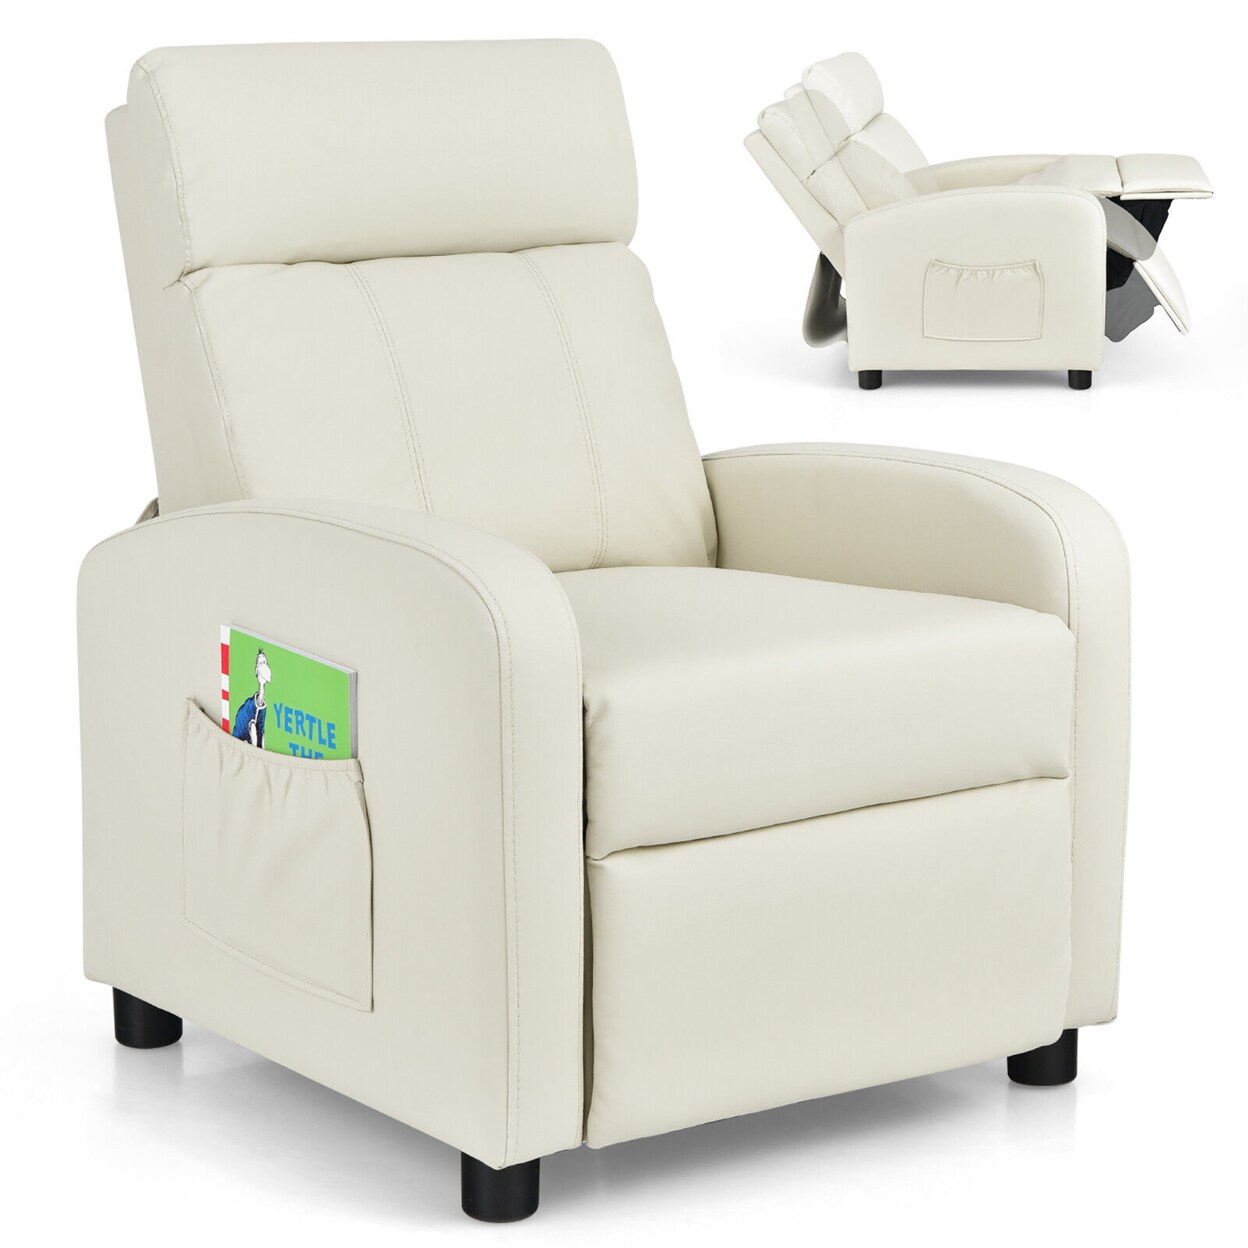 Gymax Kids Recliner Chair Adjustable Leather Sofa Armchair w/ Footrest Side Pocket